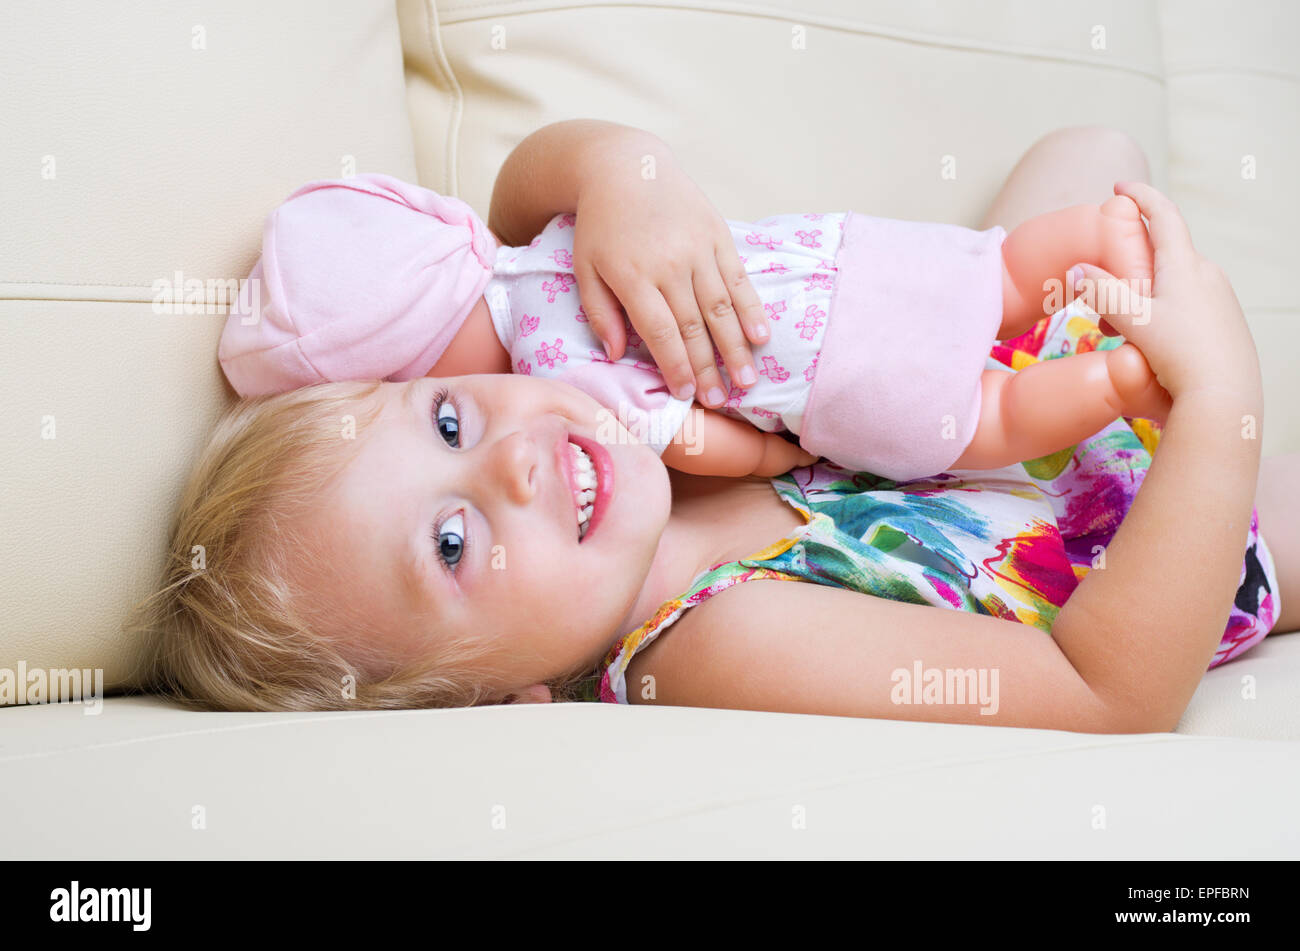 Little smiling girl with doll Stock Photo